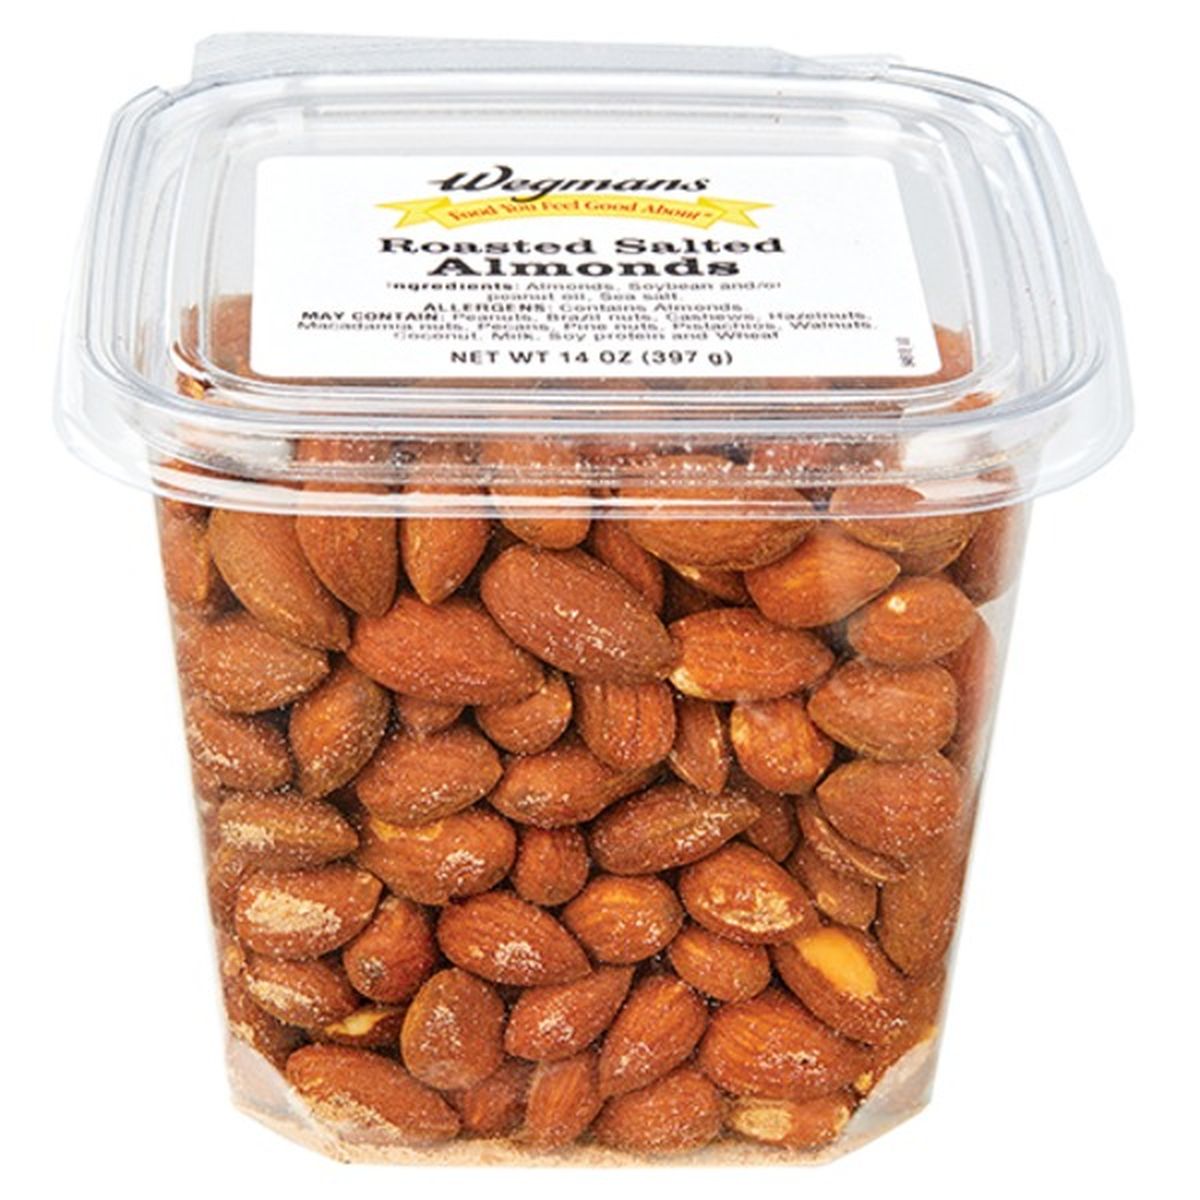 Calories in Wegmans Roasted Salted Almonds